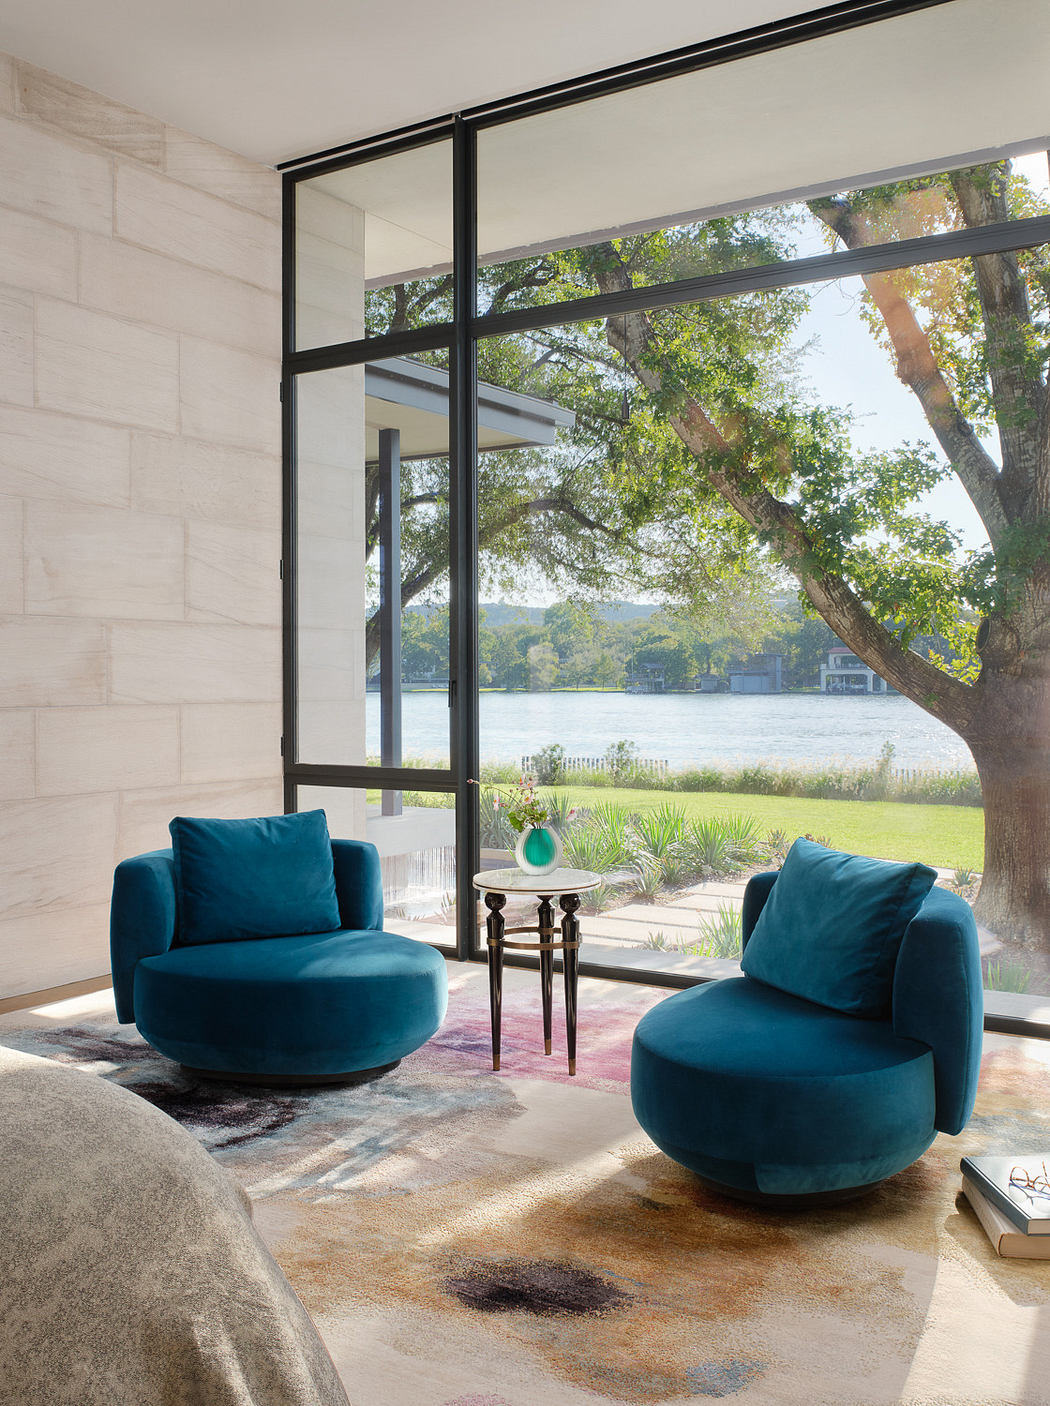 Elegant interior with two blue armchairs, floor-to-ceiling windows,